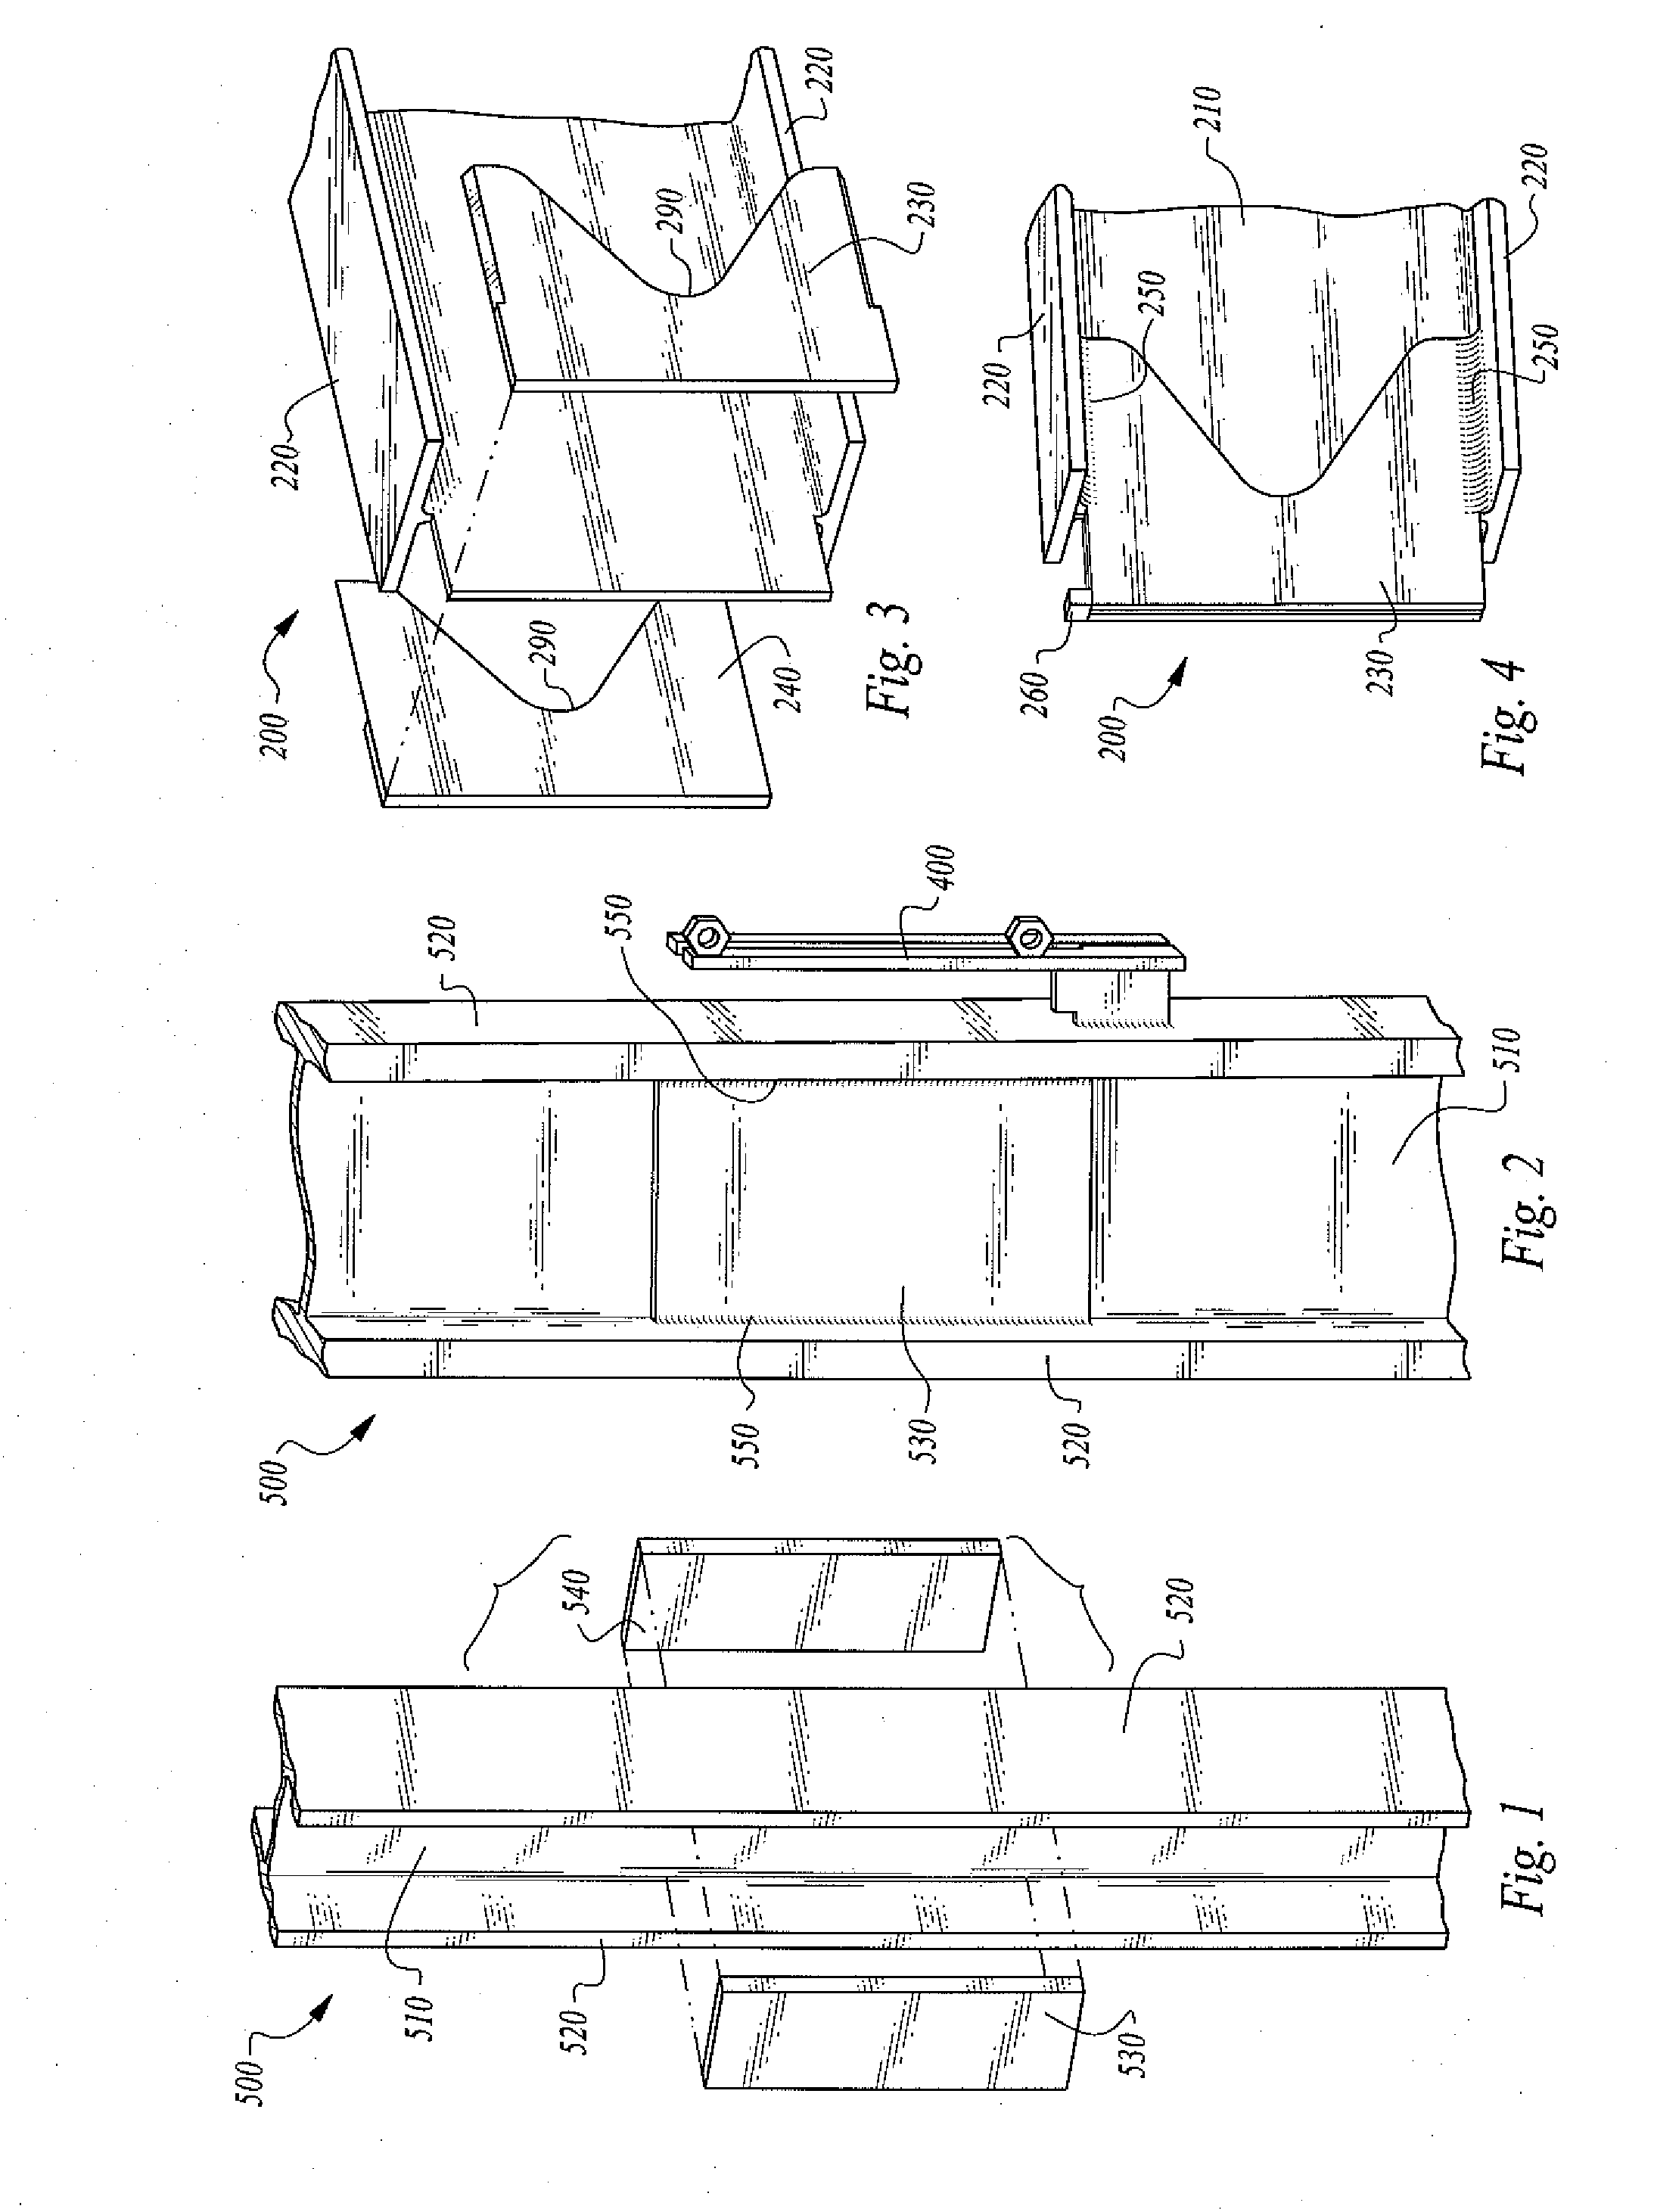 Assembly, system and method for automated vertical moment connection